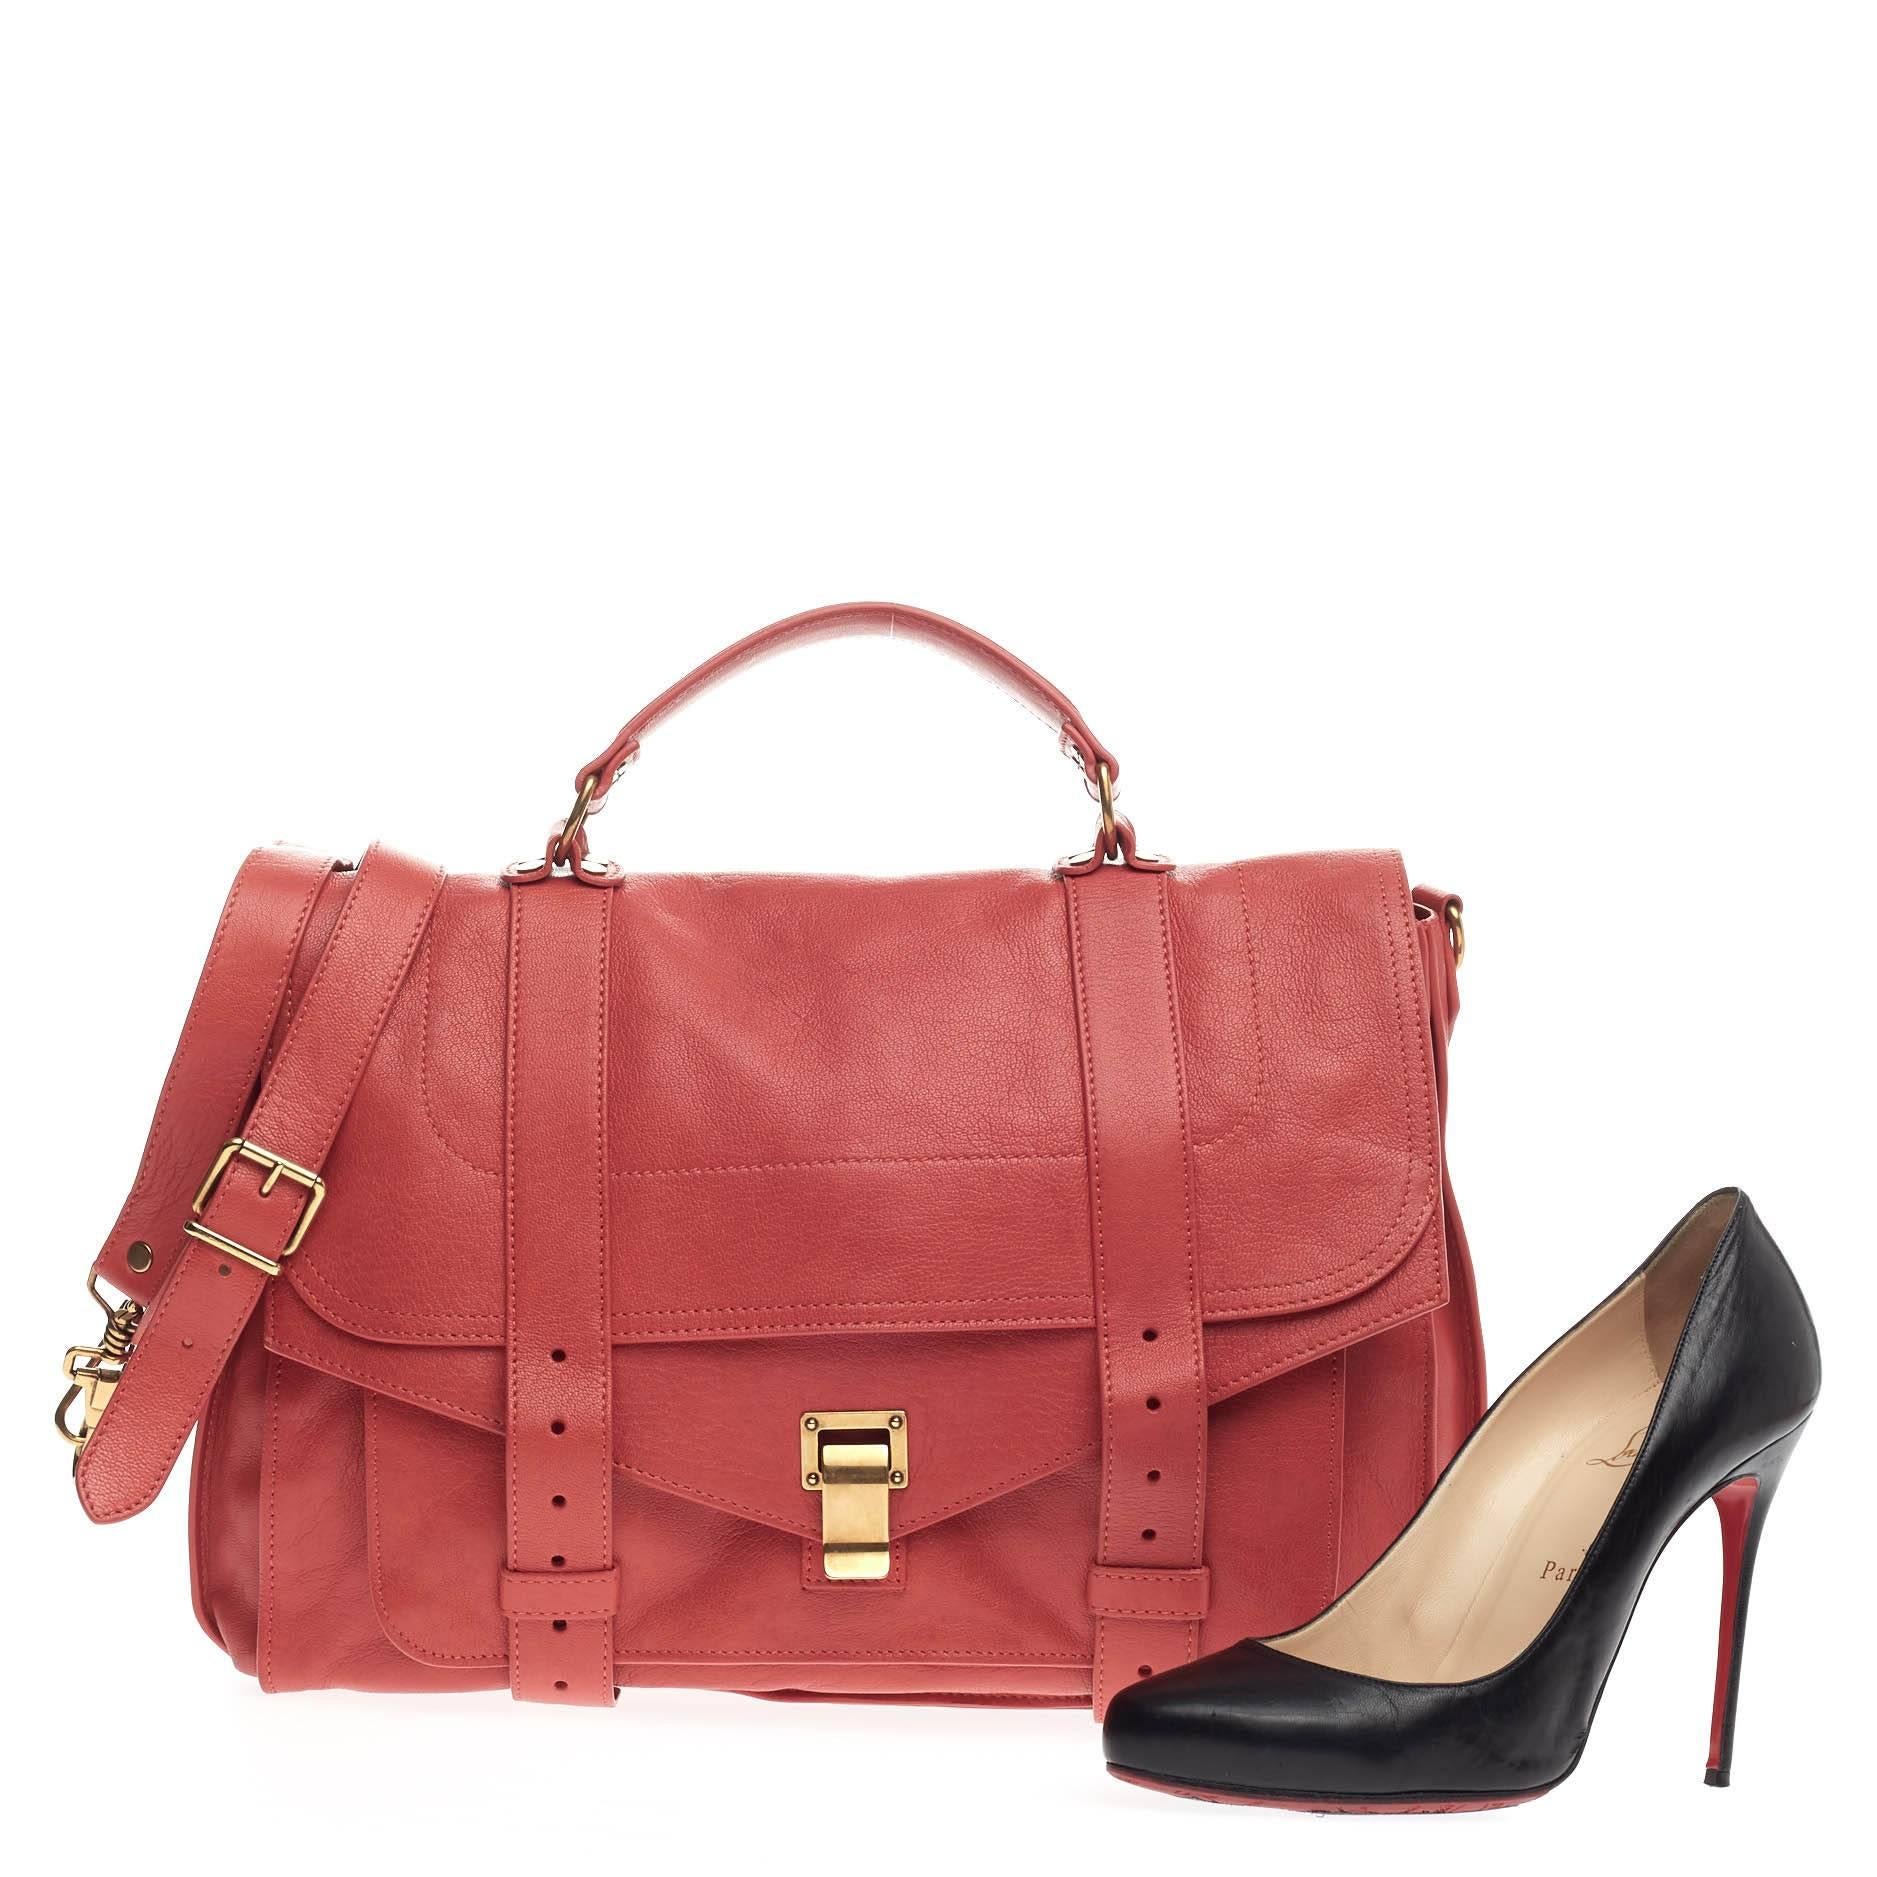 This authentic Proenza Schouler PS1 Satchel Leather Large is the ideal way to travel with style and functionality. Constructed from supple red leather, this popular satchel features an envelope-style front flap with two straps that slide through